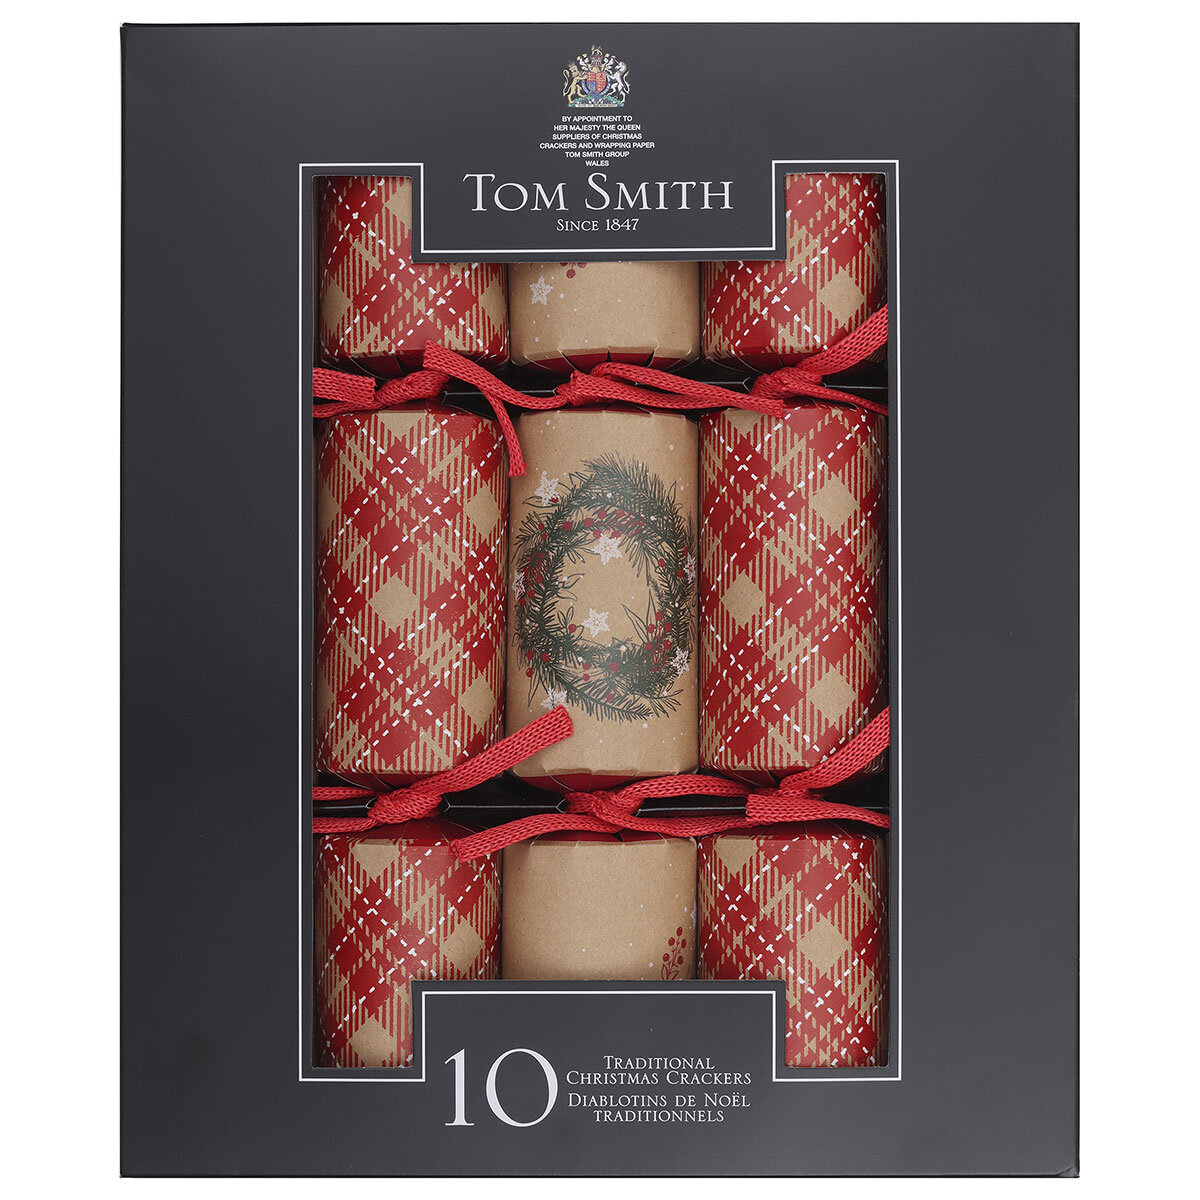 Buy Tom Smith Swarovski Crackers in Red or Silver Pack of 10 Included Image at Costco.co.uk